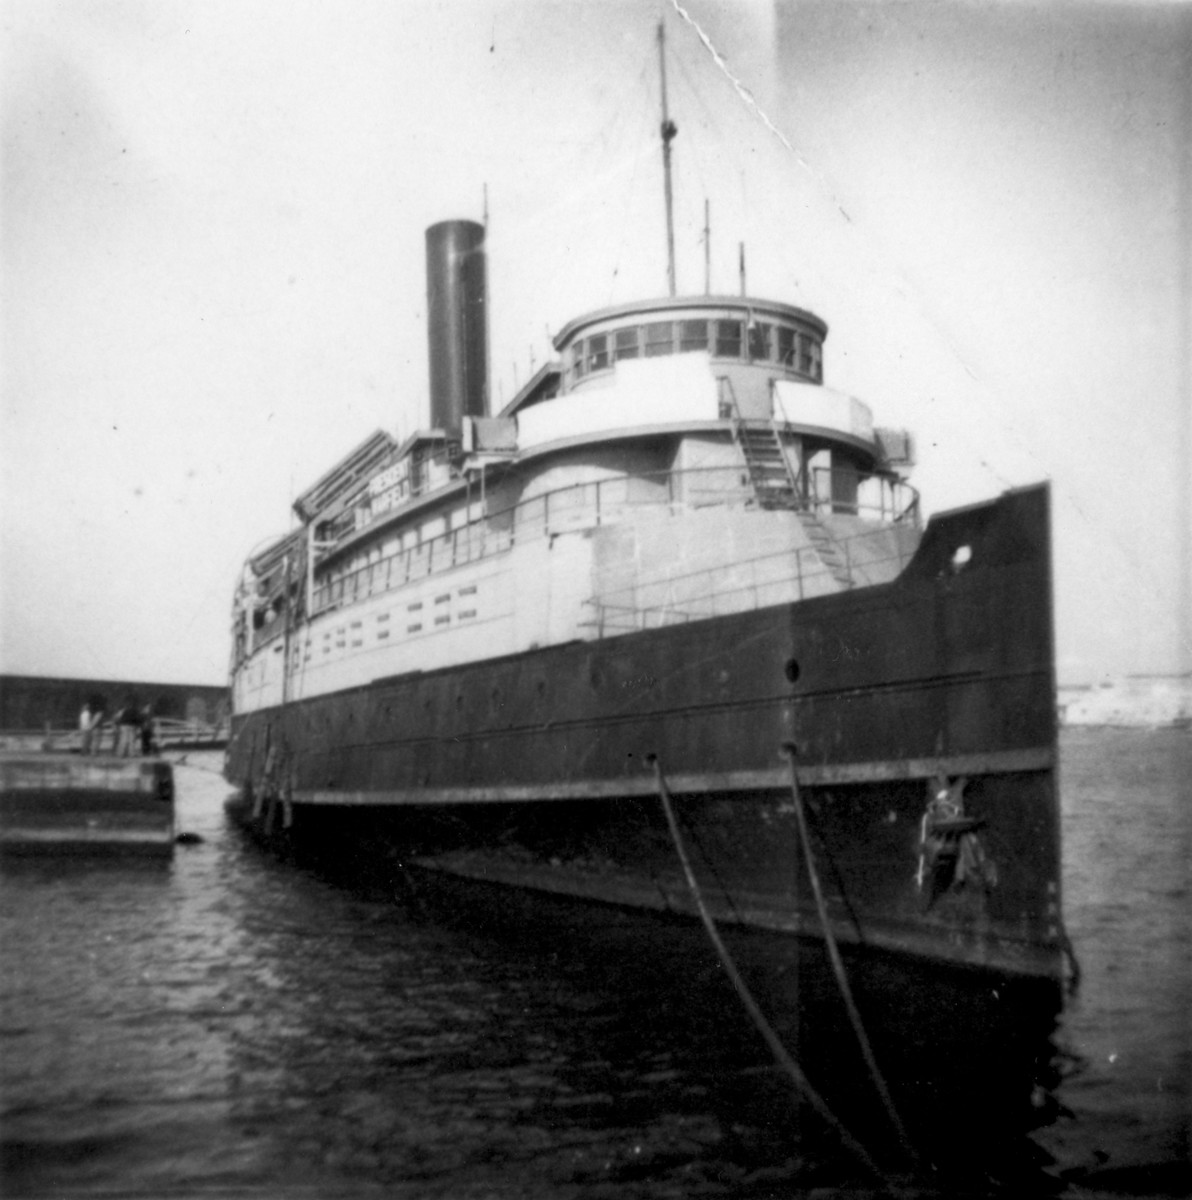 View of the illegal immigrant ship, the Exodus 1947, at berth in the port of Haifa.